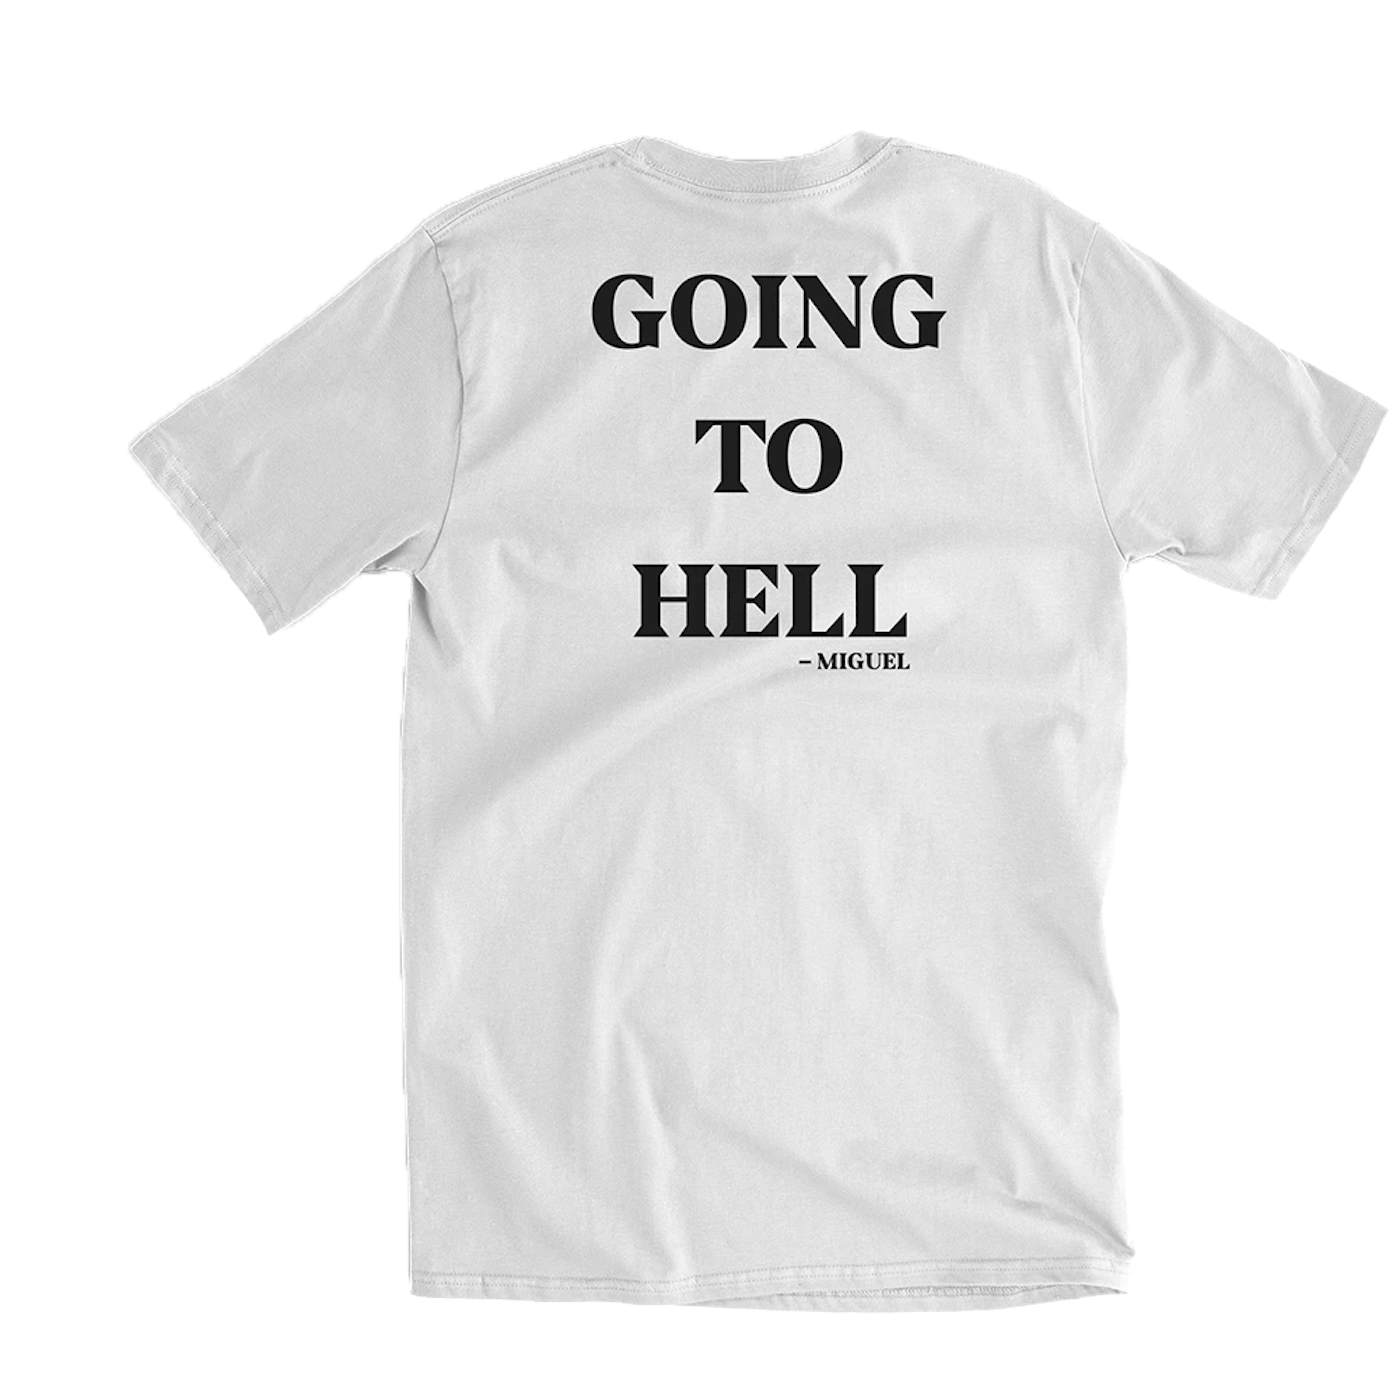 Miguel To Hell White Tee